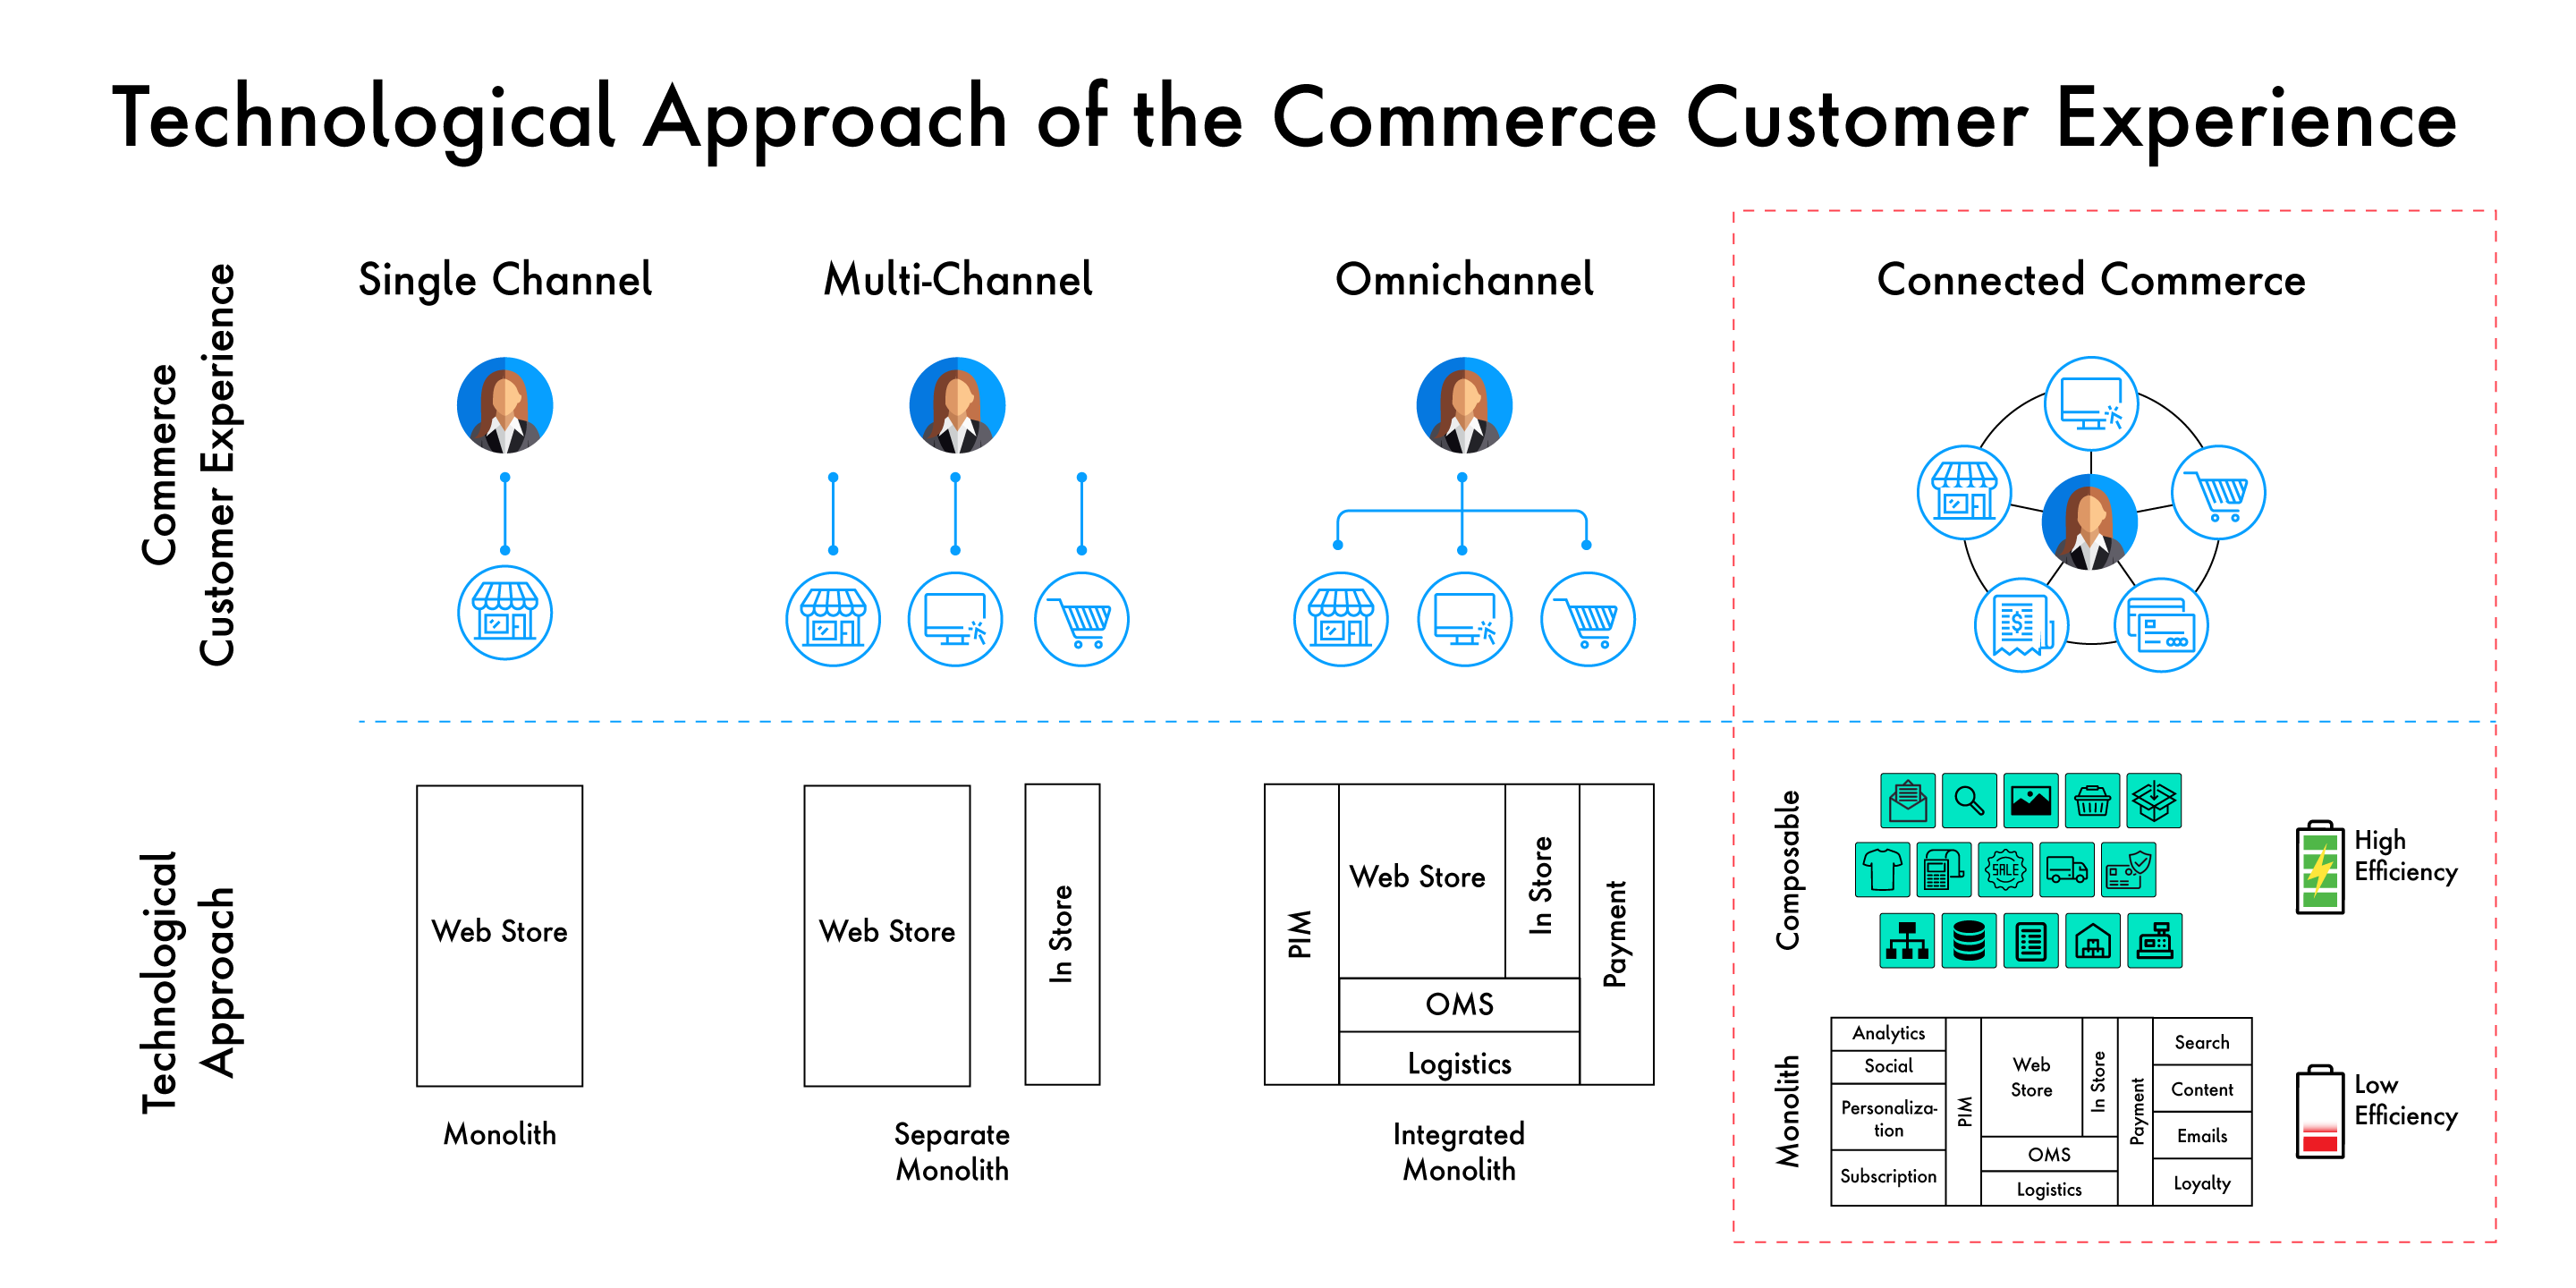 A composable architecture empowers Connected Commerce, creating superior customer experiences.